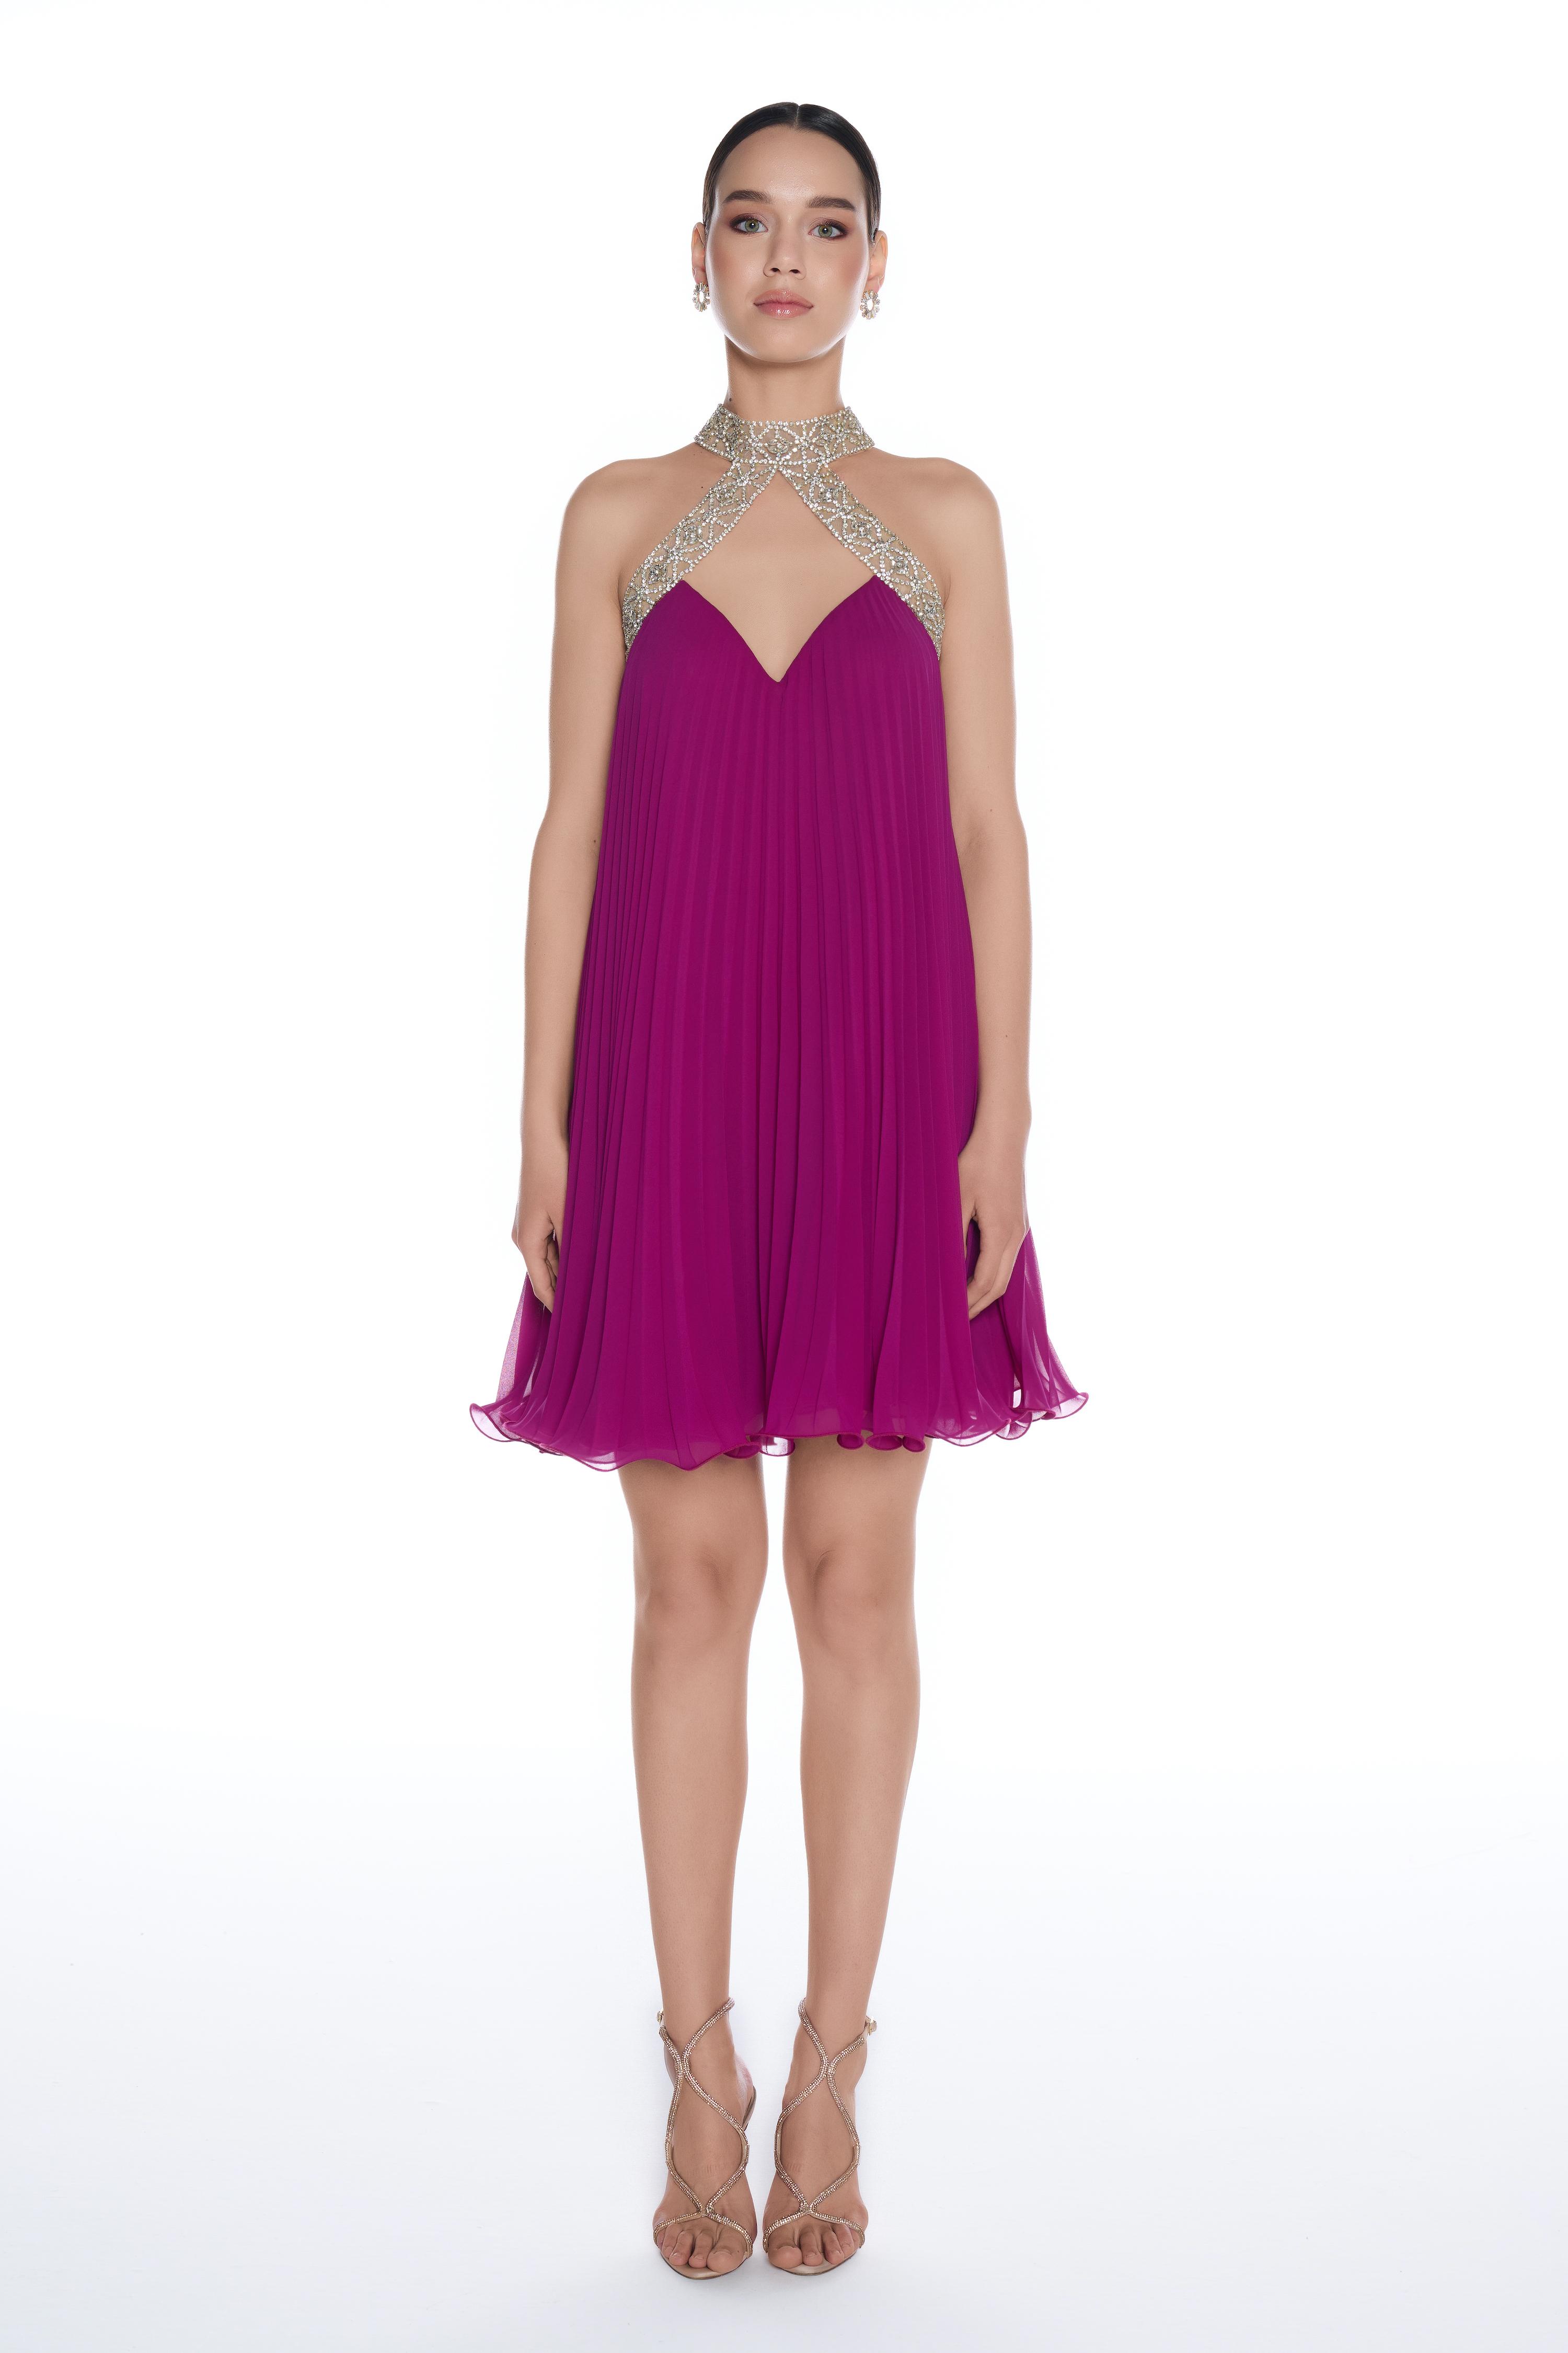 R46 - Halter Neck, Plunging Neckline, Vollar with Swarovski and Stone Hand Embroidery, Complete Pleated, Mini Dress